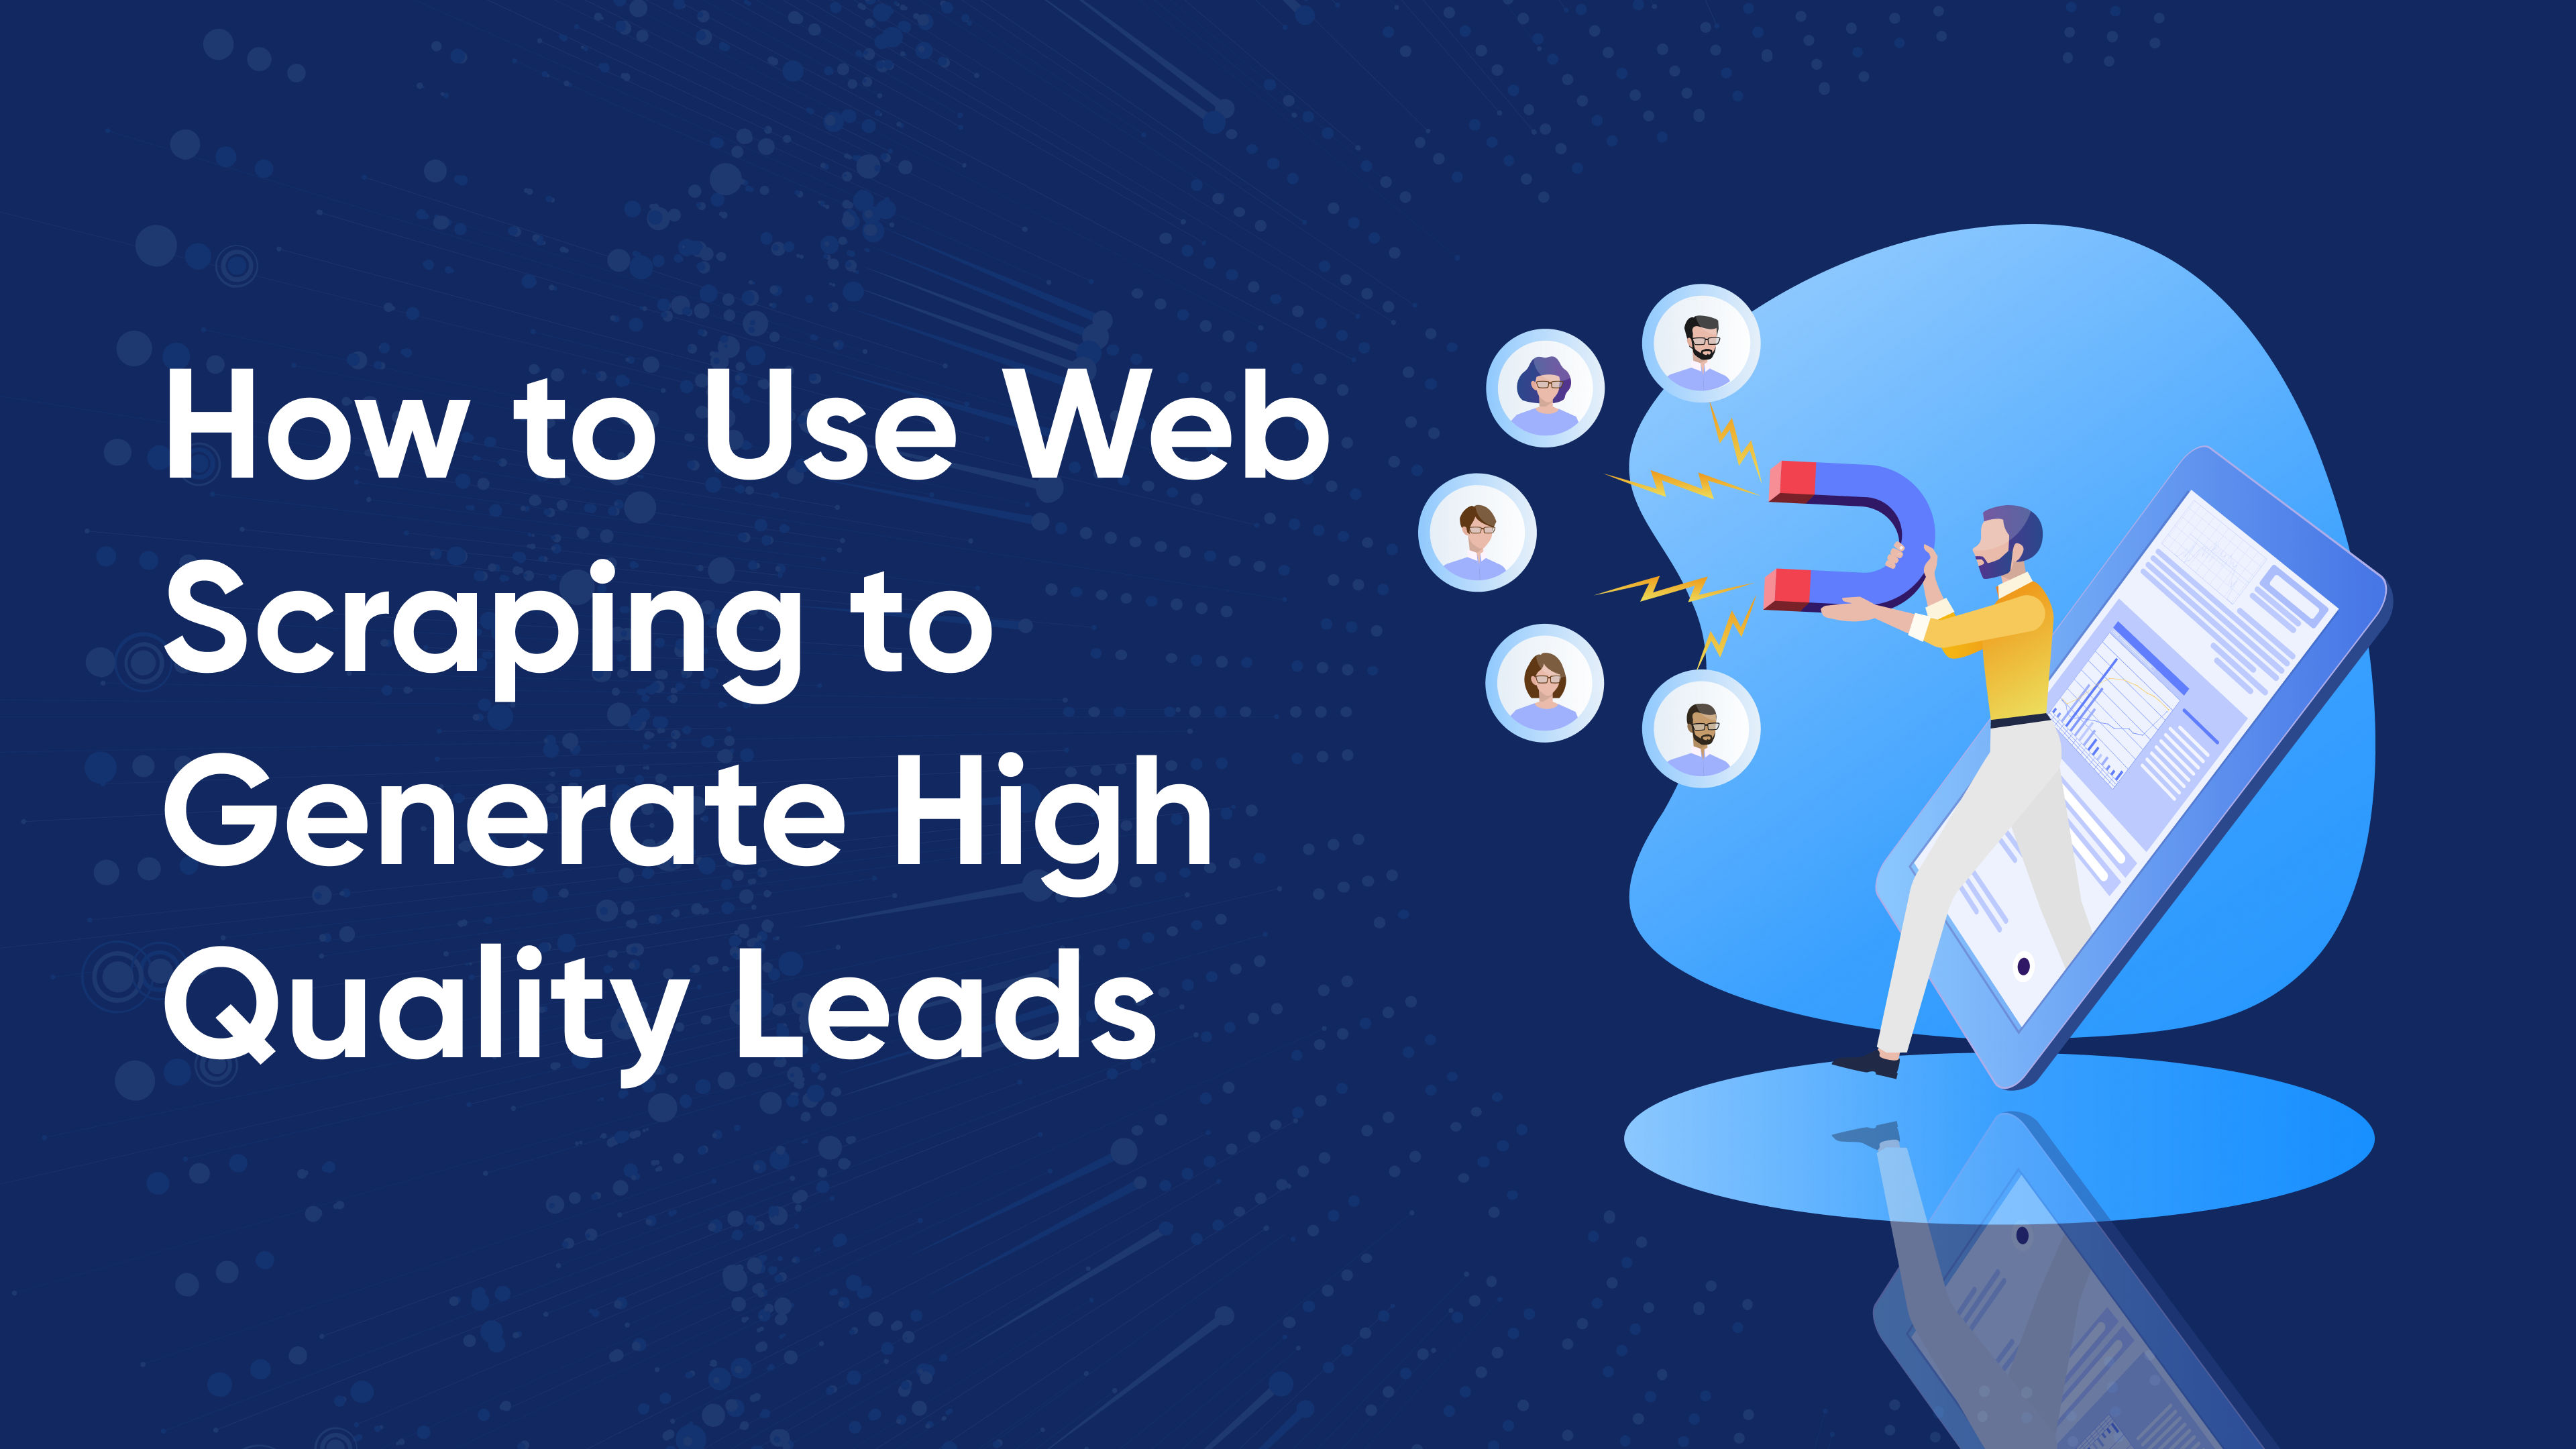 How to Use Web Scraping to Generate High Quality Leads and Grow Your Business